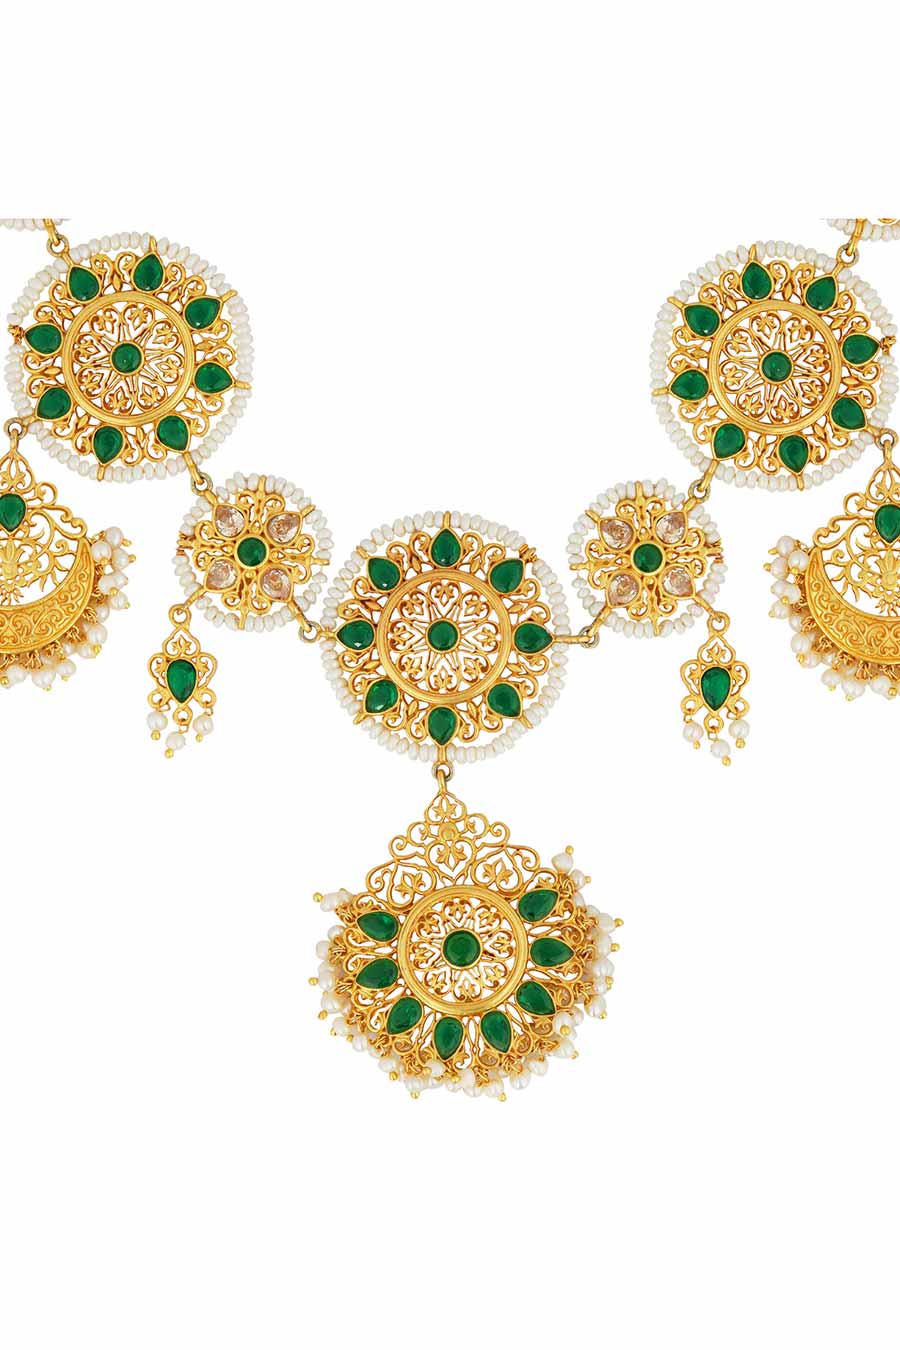 Khwaabeeda Gold Plated Necklace